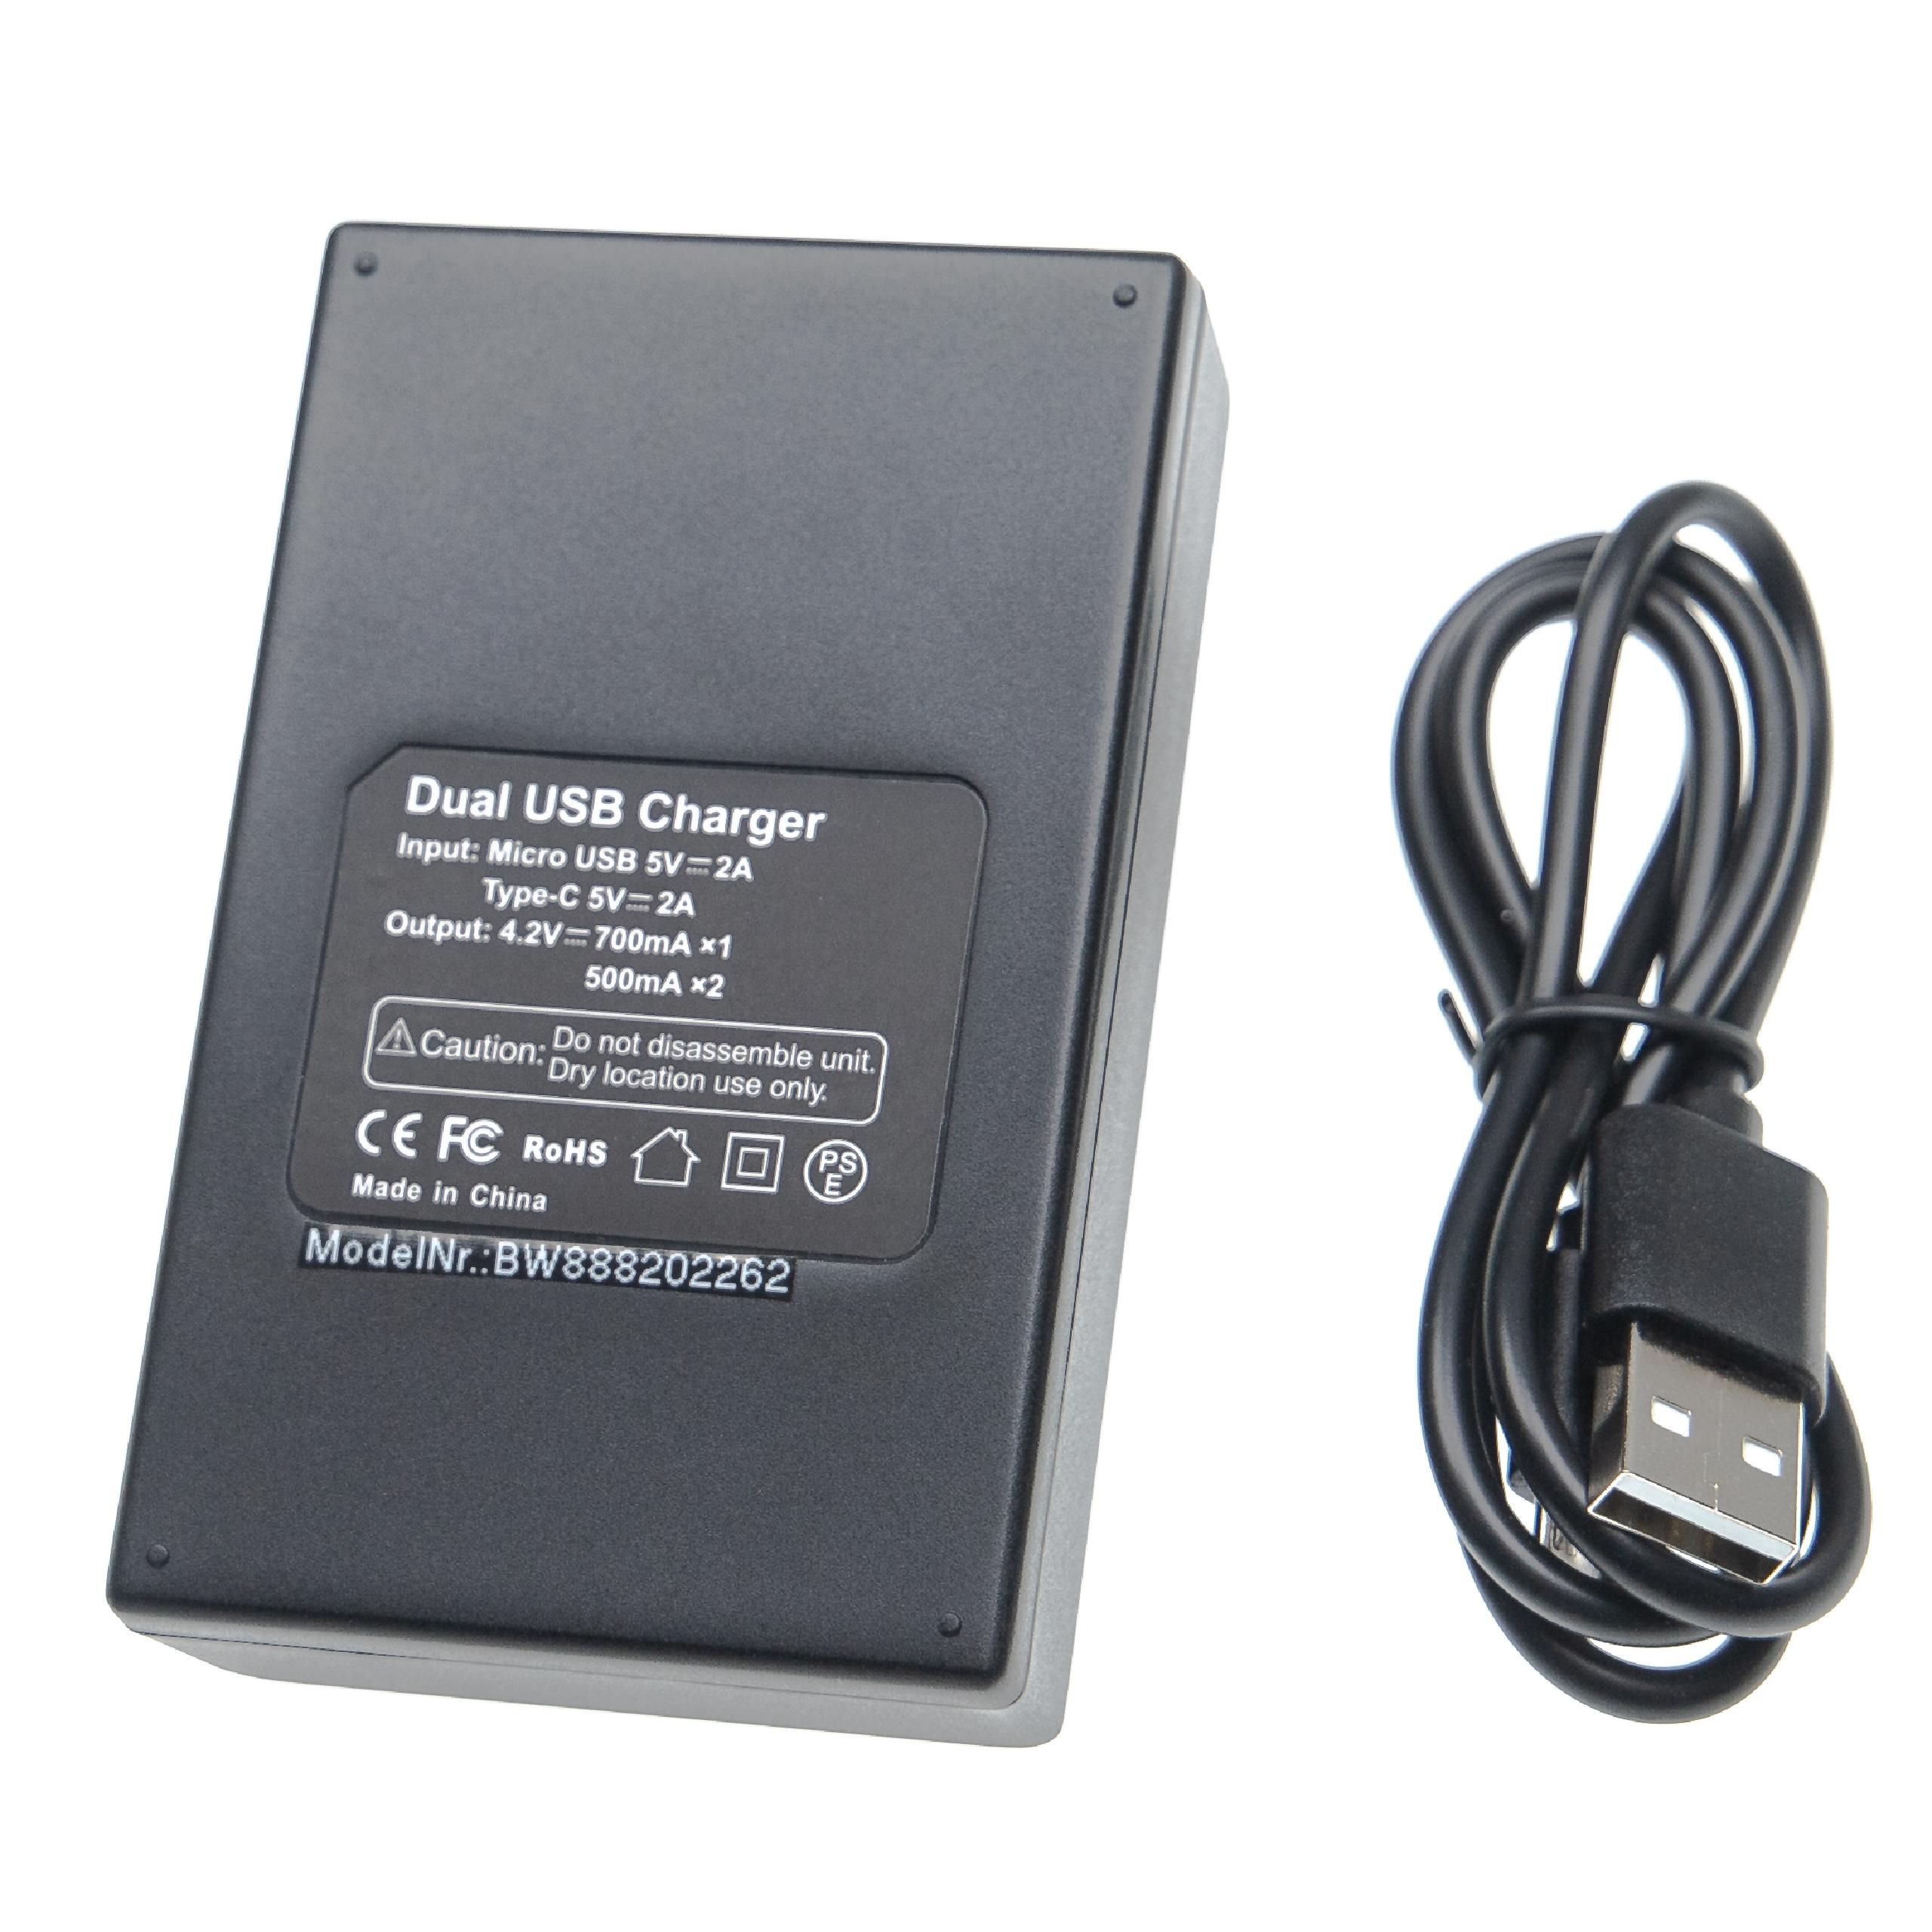 Battery Charger suitable for Hero 5 Black Camera etc. - 0,7 / 0,5 A, 4.2 V